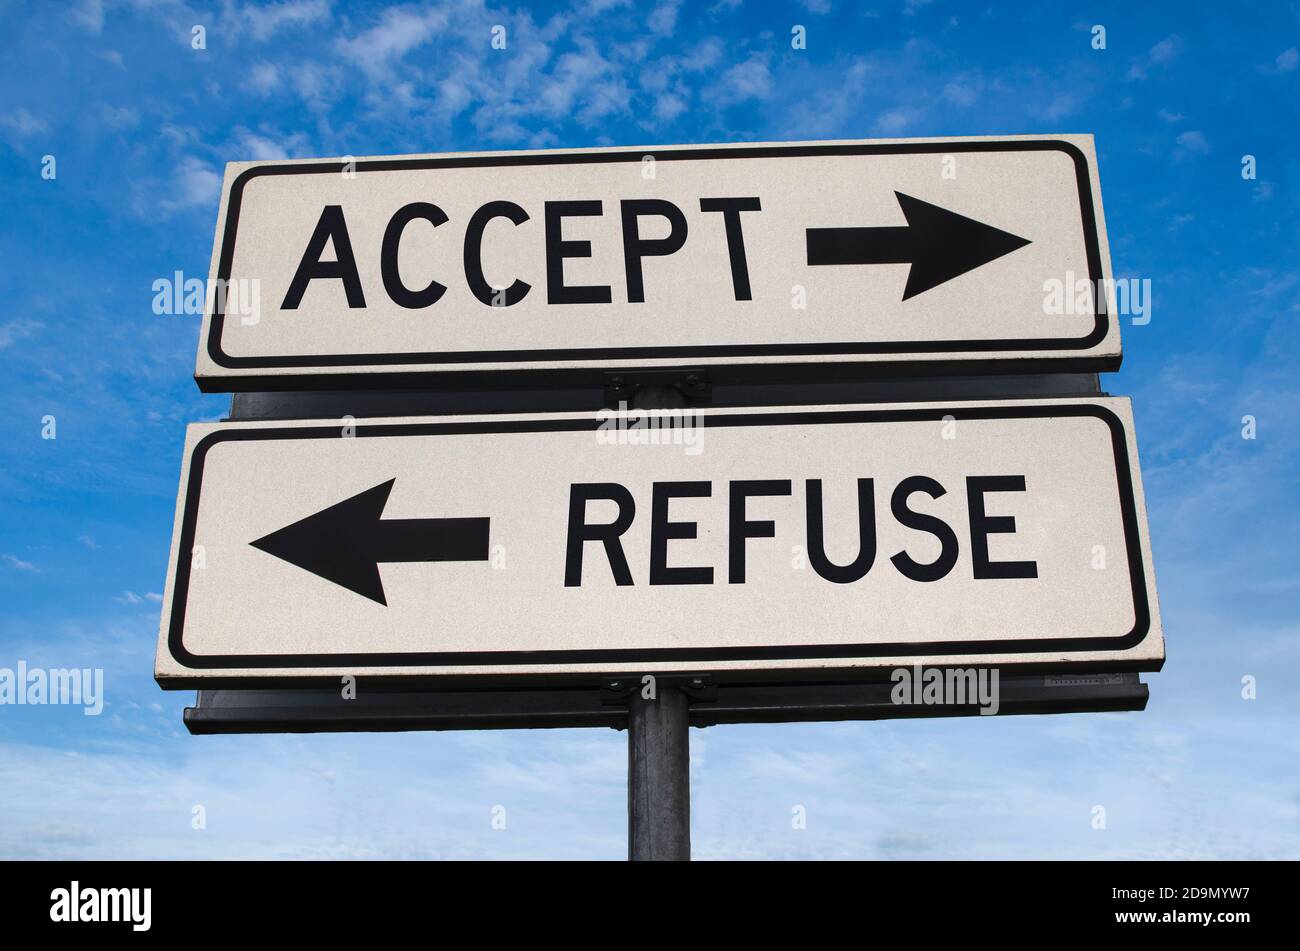 Accept vs refuse. White two street signs with arrow on metal pole with word. Directional road. Crossroads Road Sign, Two Arrow. Blue sky background. T Stock Photo